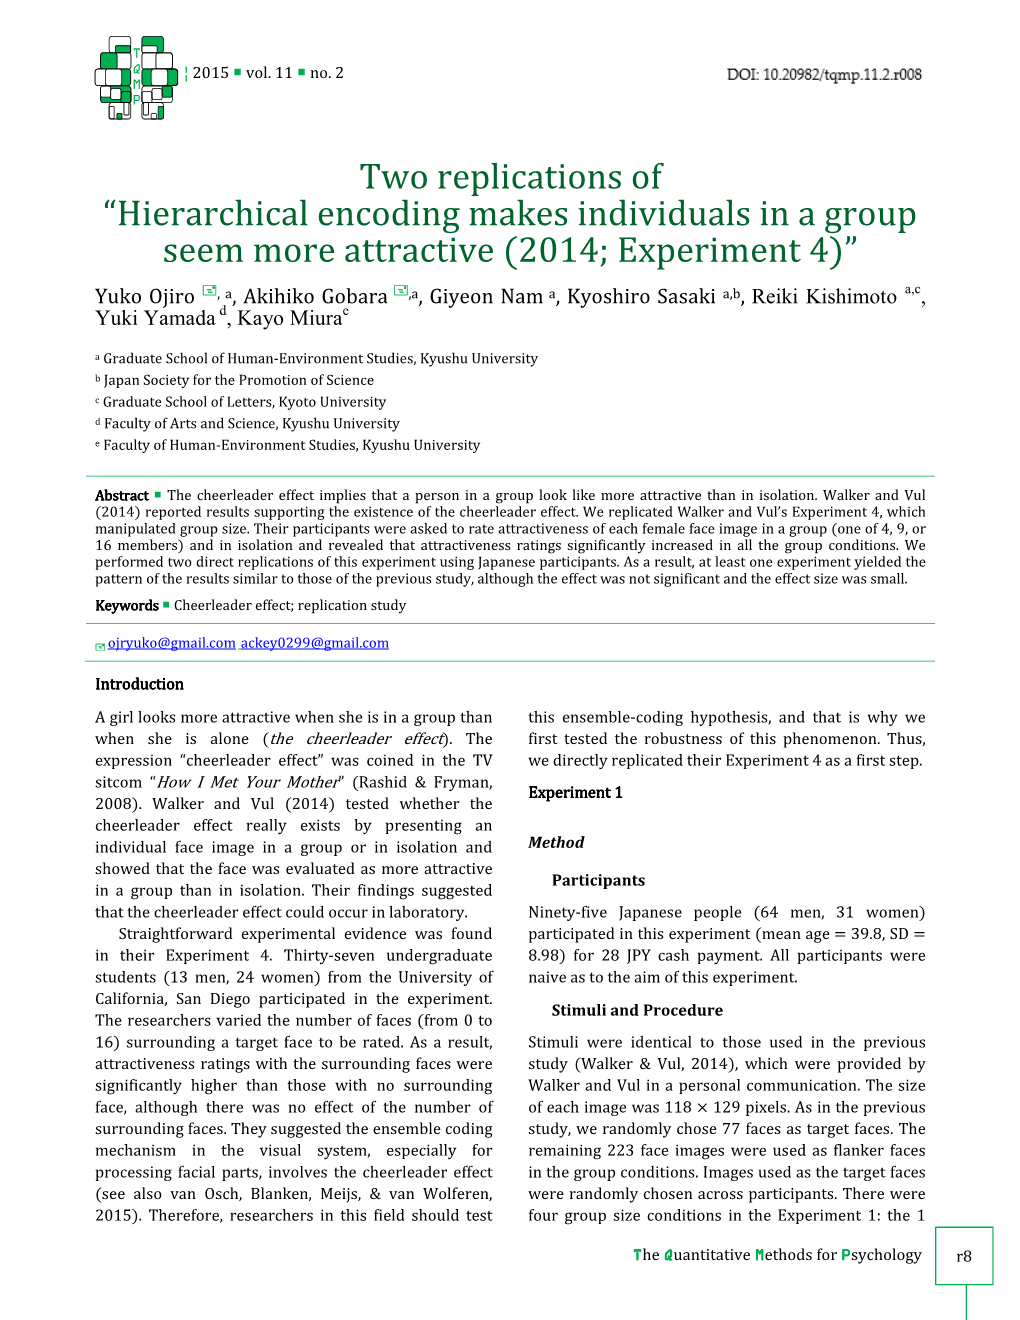 Two Replications of “Hierarchical Encoding Makes Individuals in a Group Seem More Attractive (2014; Experiment